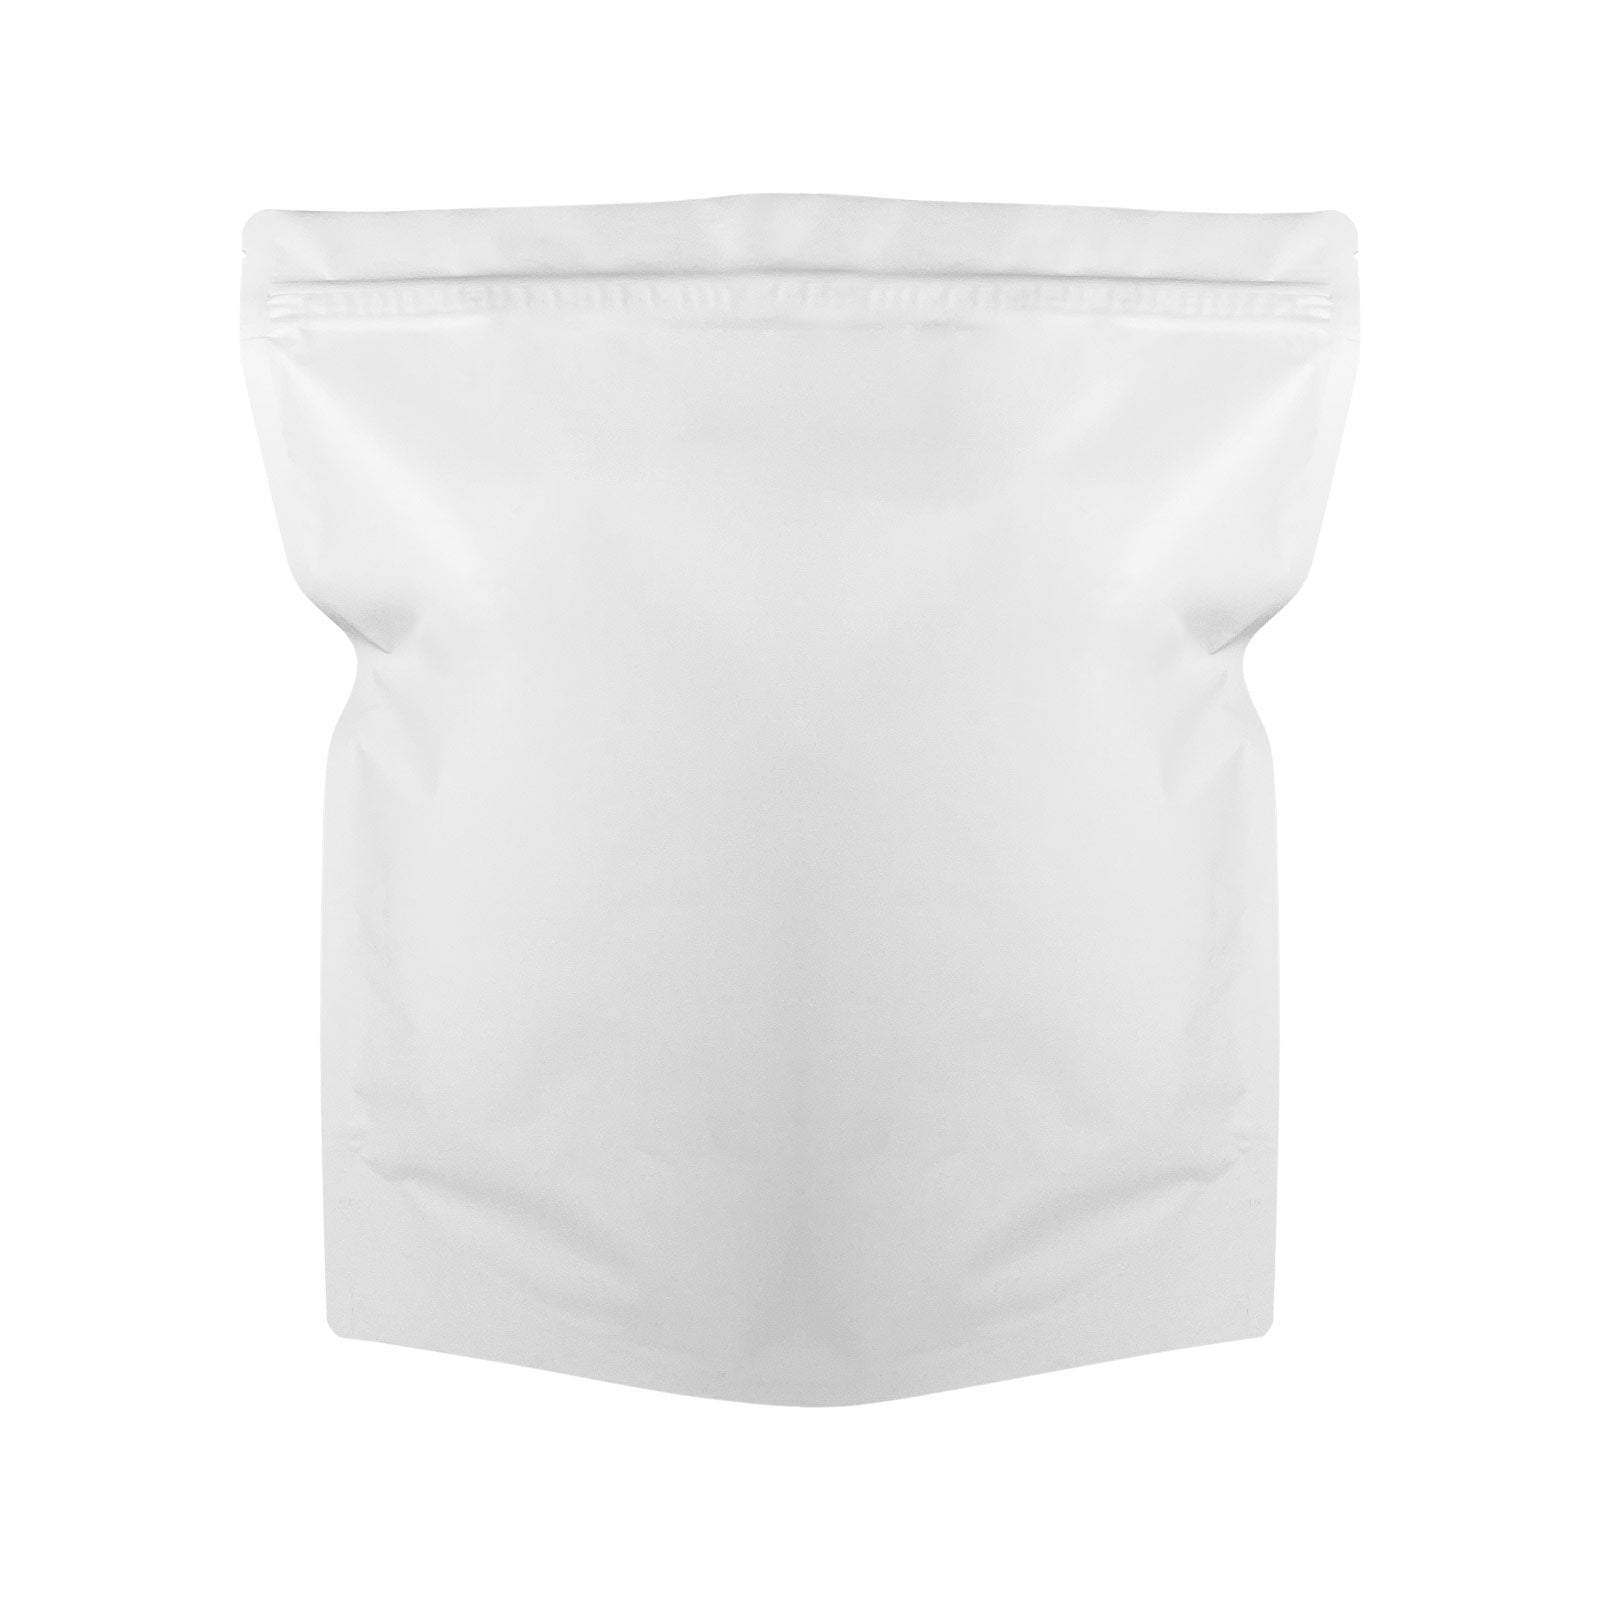 14.6"x16.4"+4" Extra Large Child Resistant 1-3 lbs Exit Bags All White - 20 Count